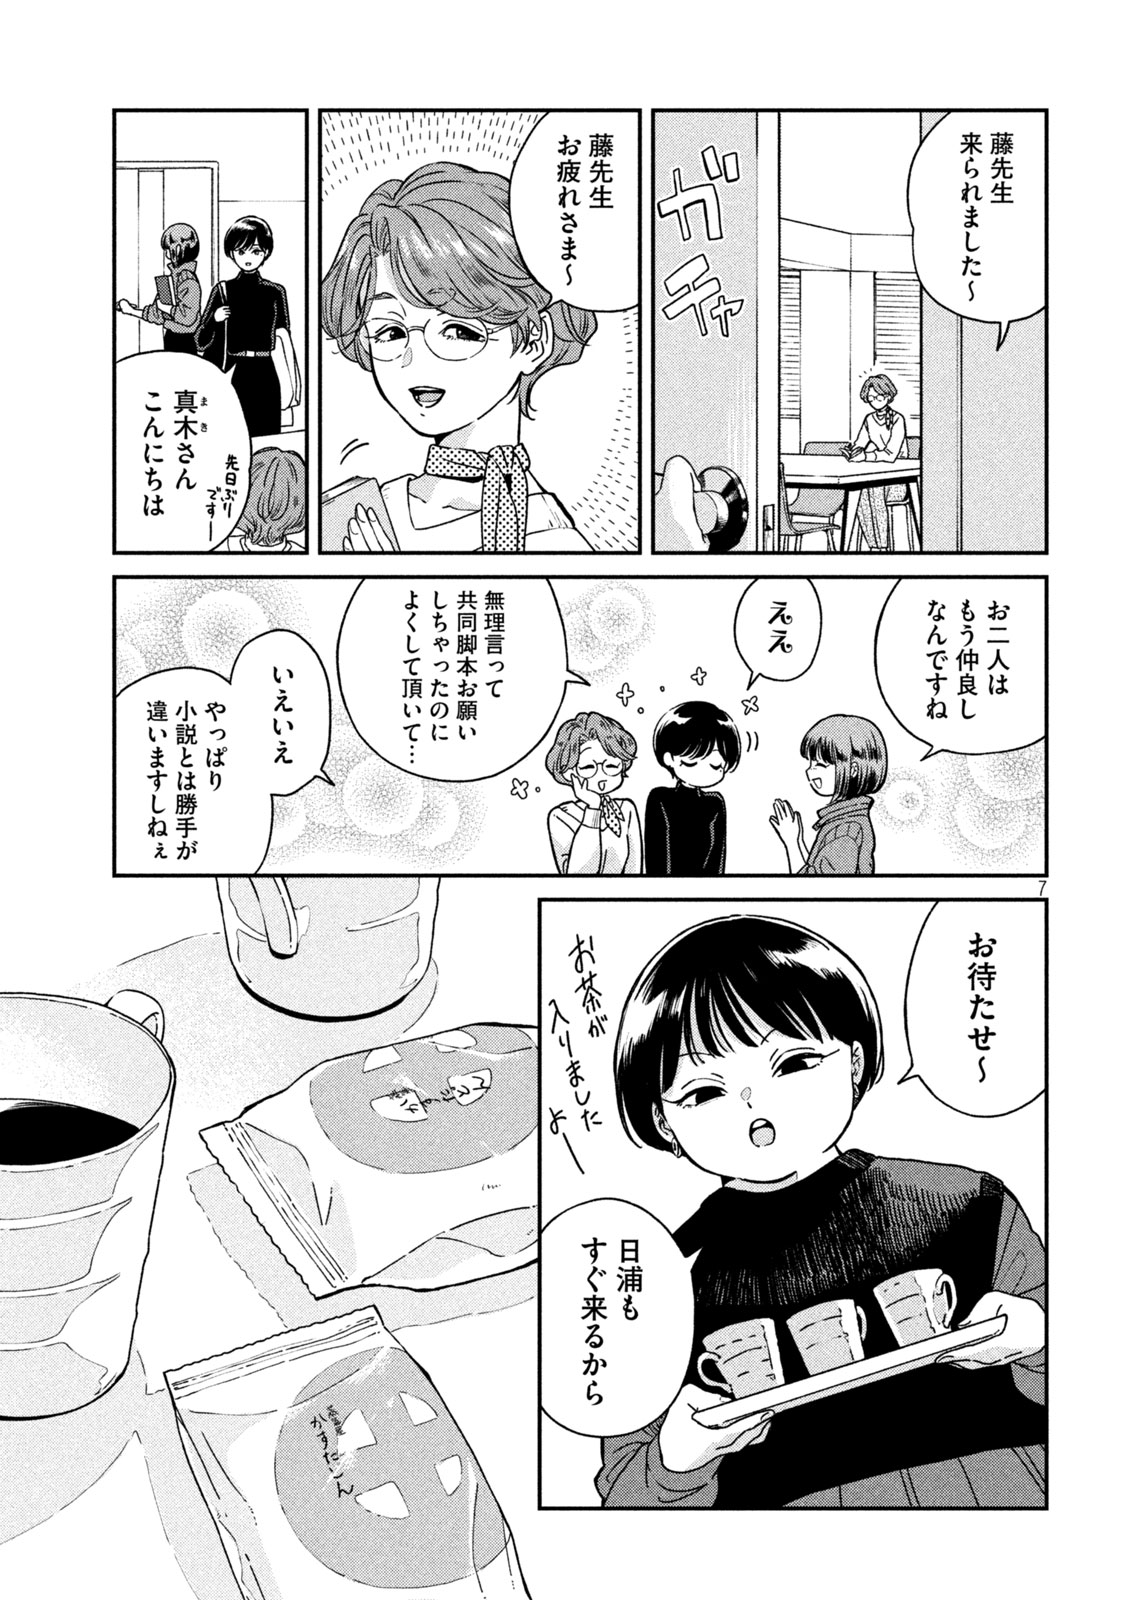 Ame to Kimi to - Chapter 118 - Page 7